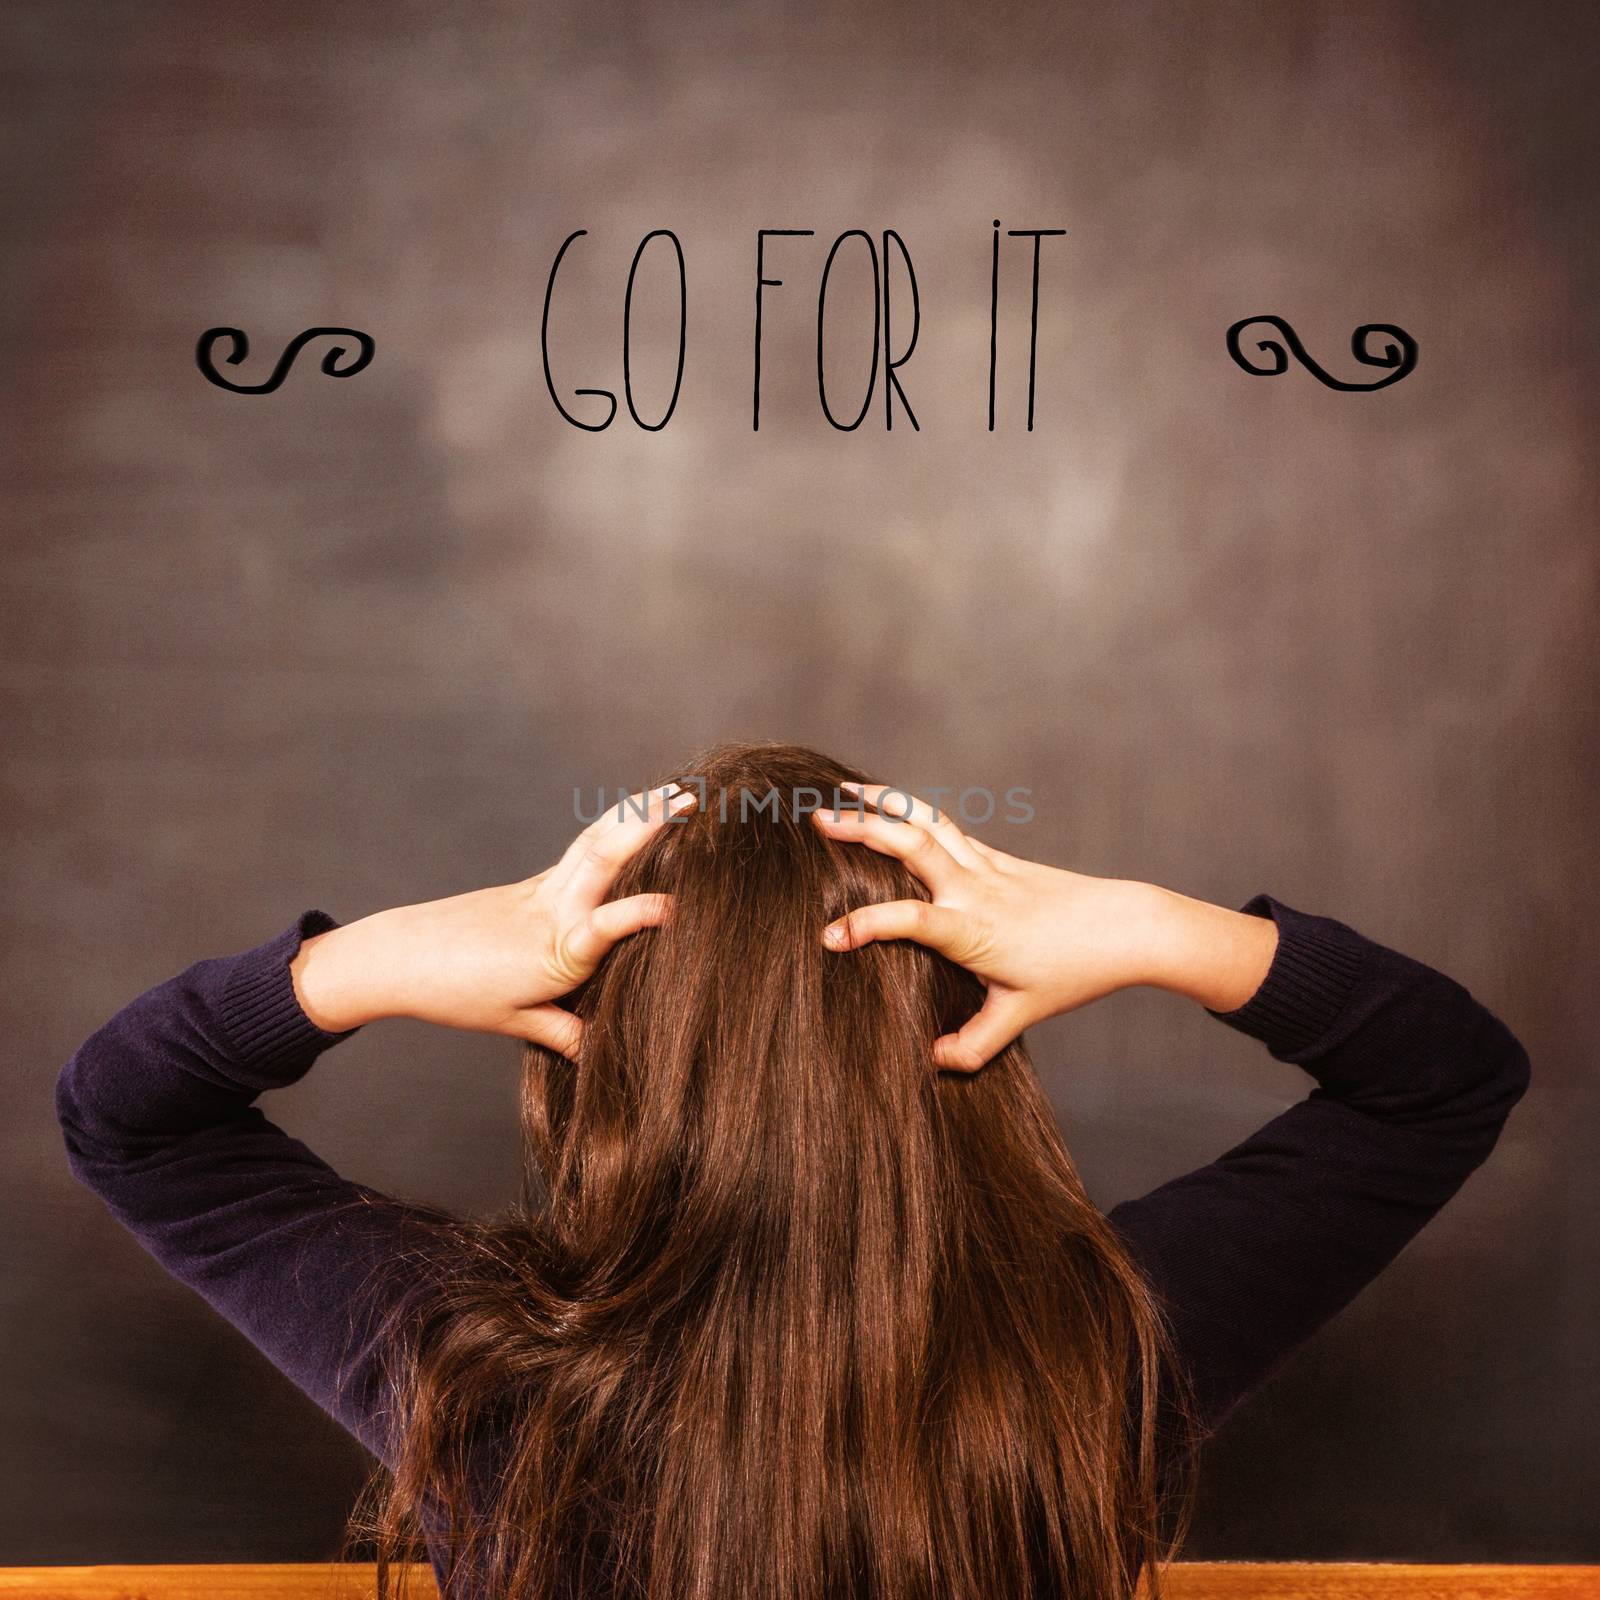 Go for it! against confused pupil looking at chalkboard by Wavebreakmedia